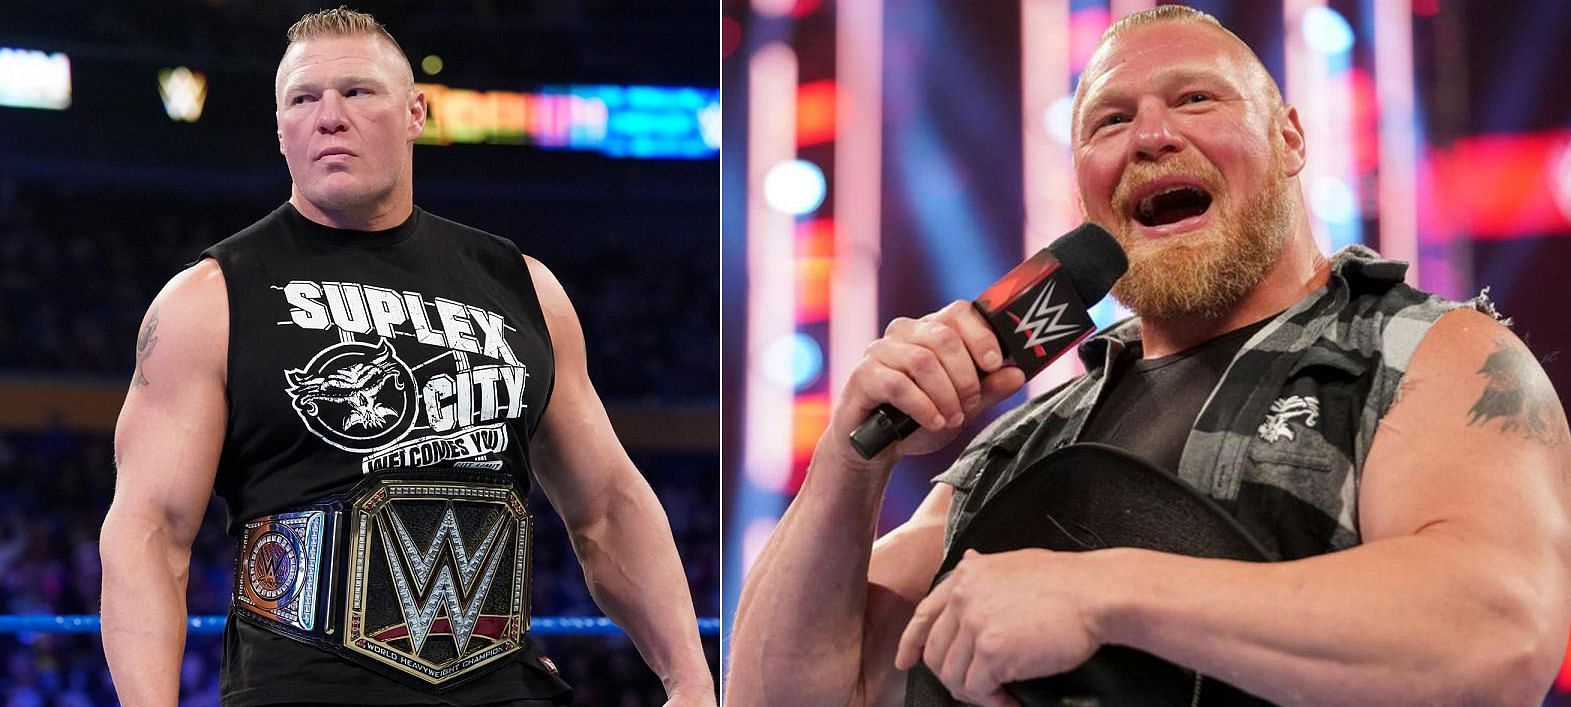 Brock Lesnar could have new competition on RAW